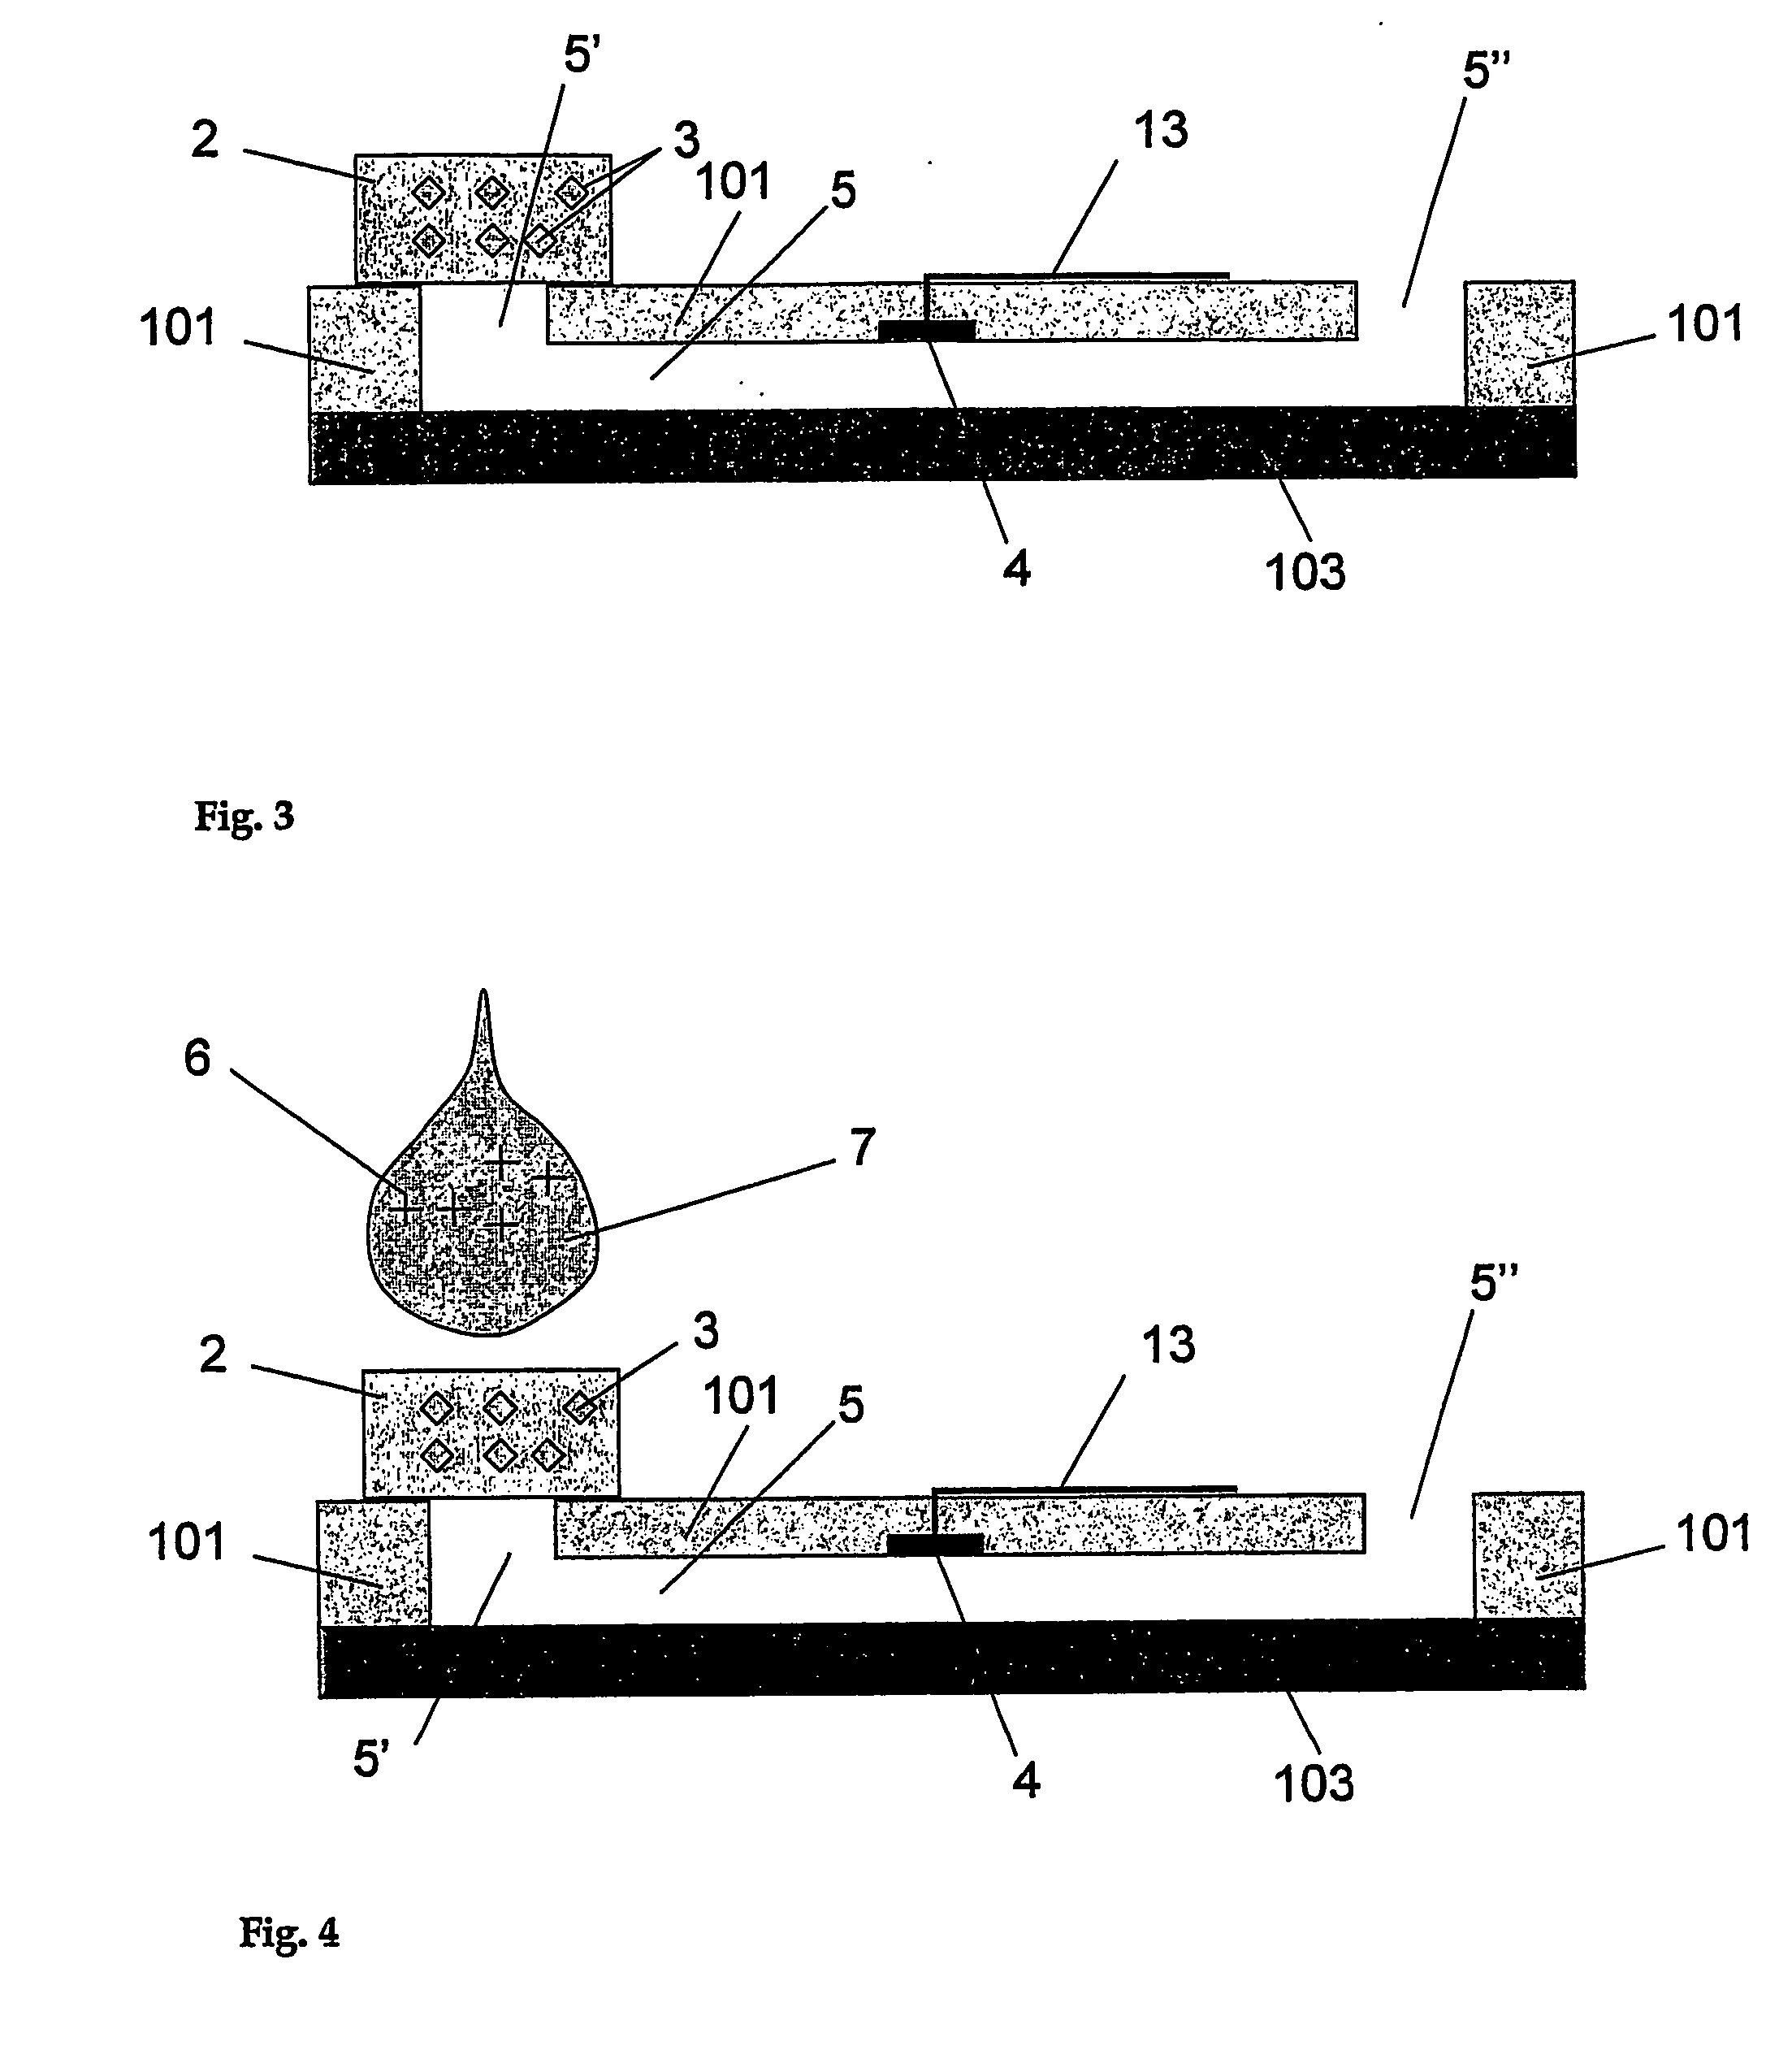 Multi-layered electrochemical microfluidic sensor comprising reagent on porous layer